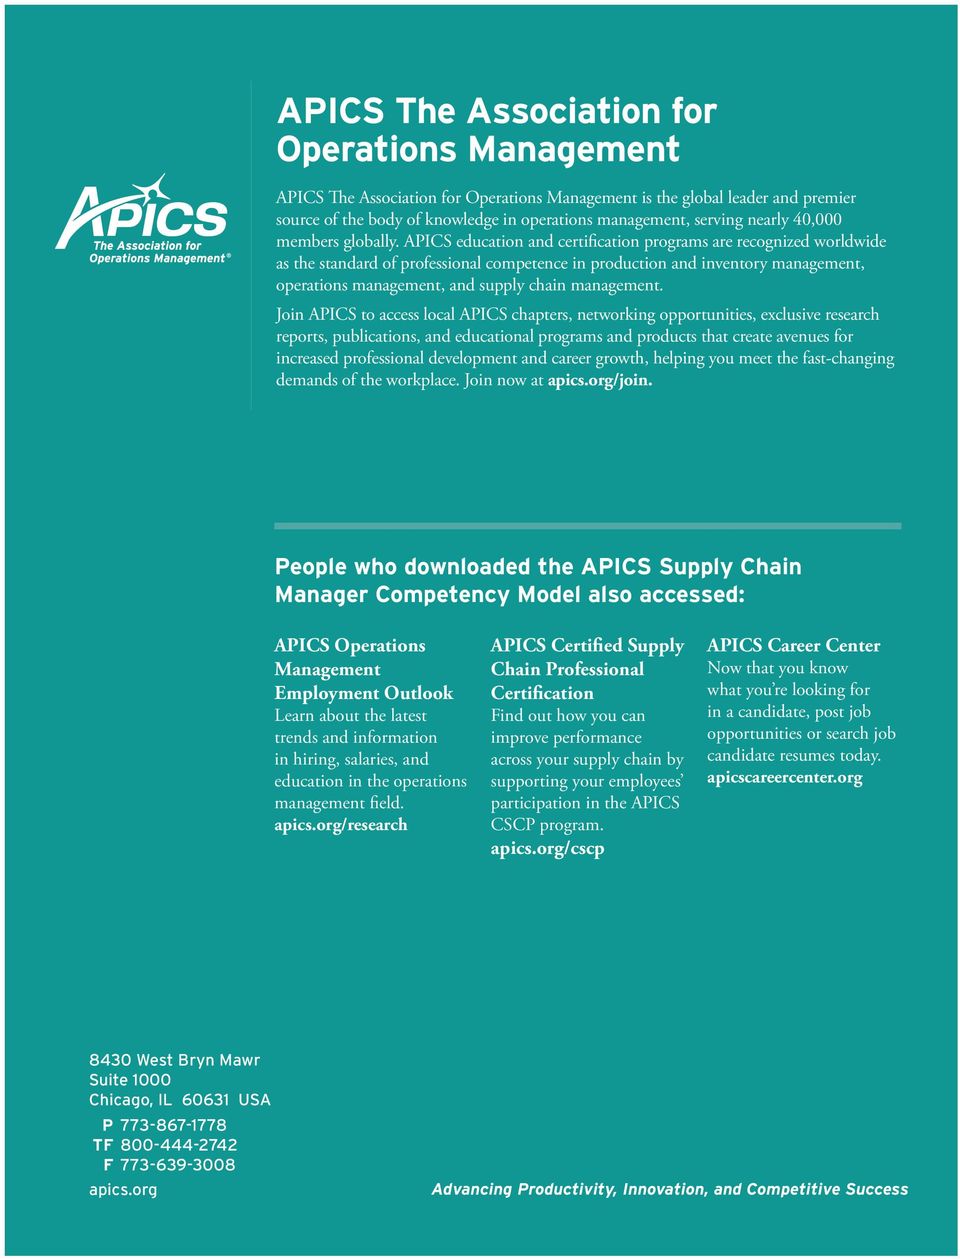 APICS education and certification programs are recognized worldwide as the standard of professional competence in production and inventory management, operations management, and supply chain